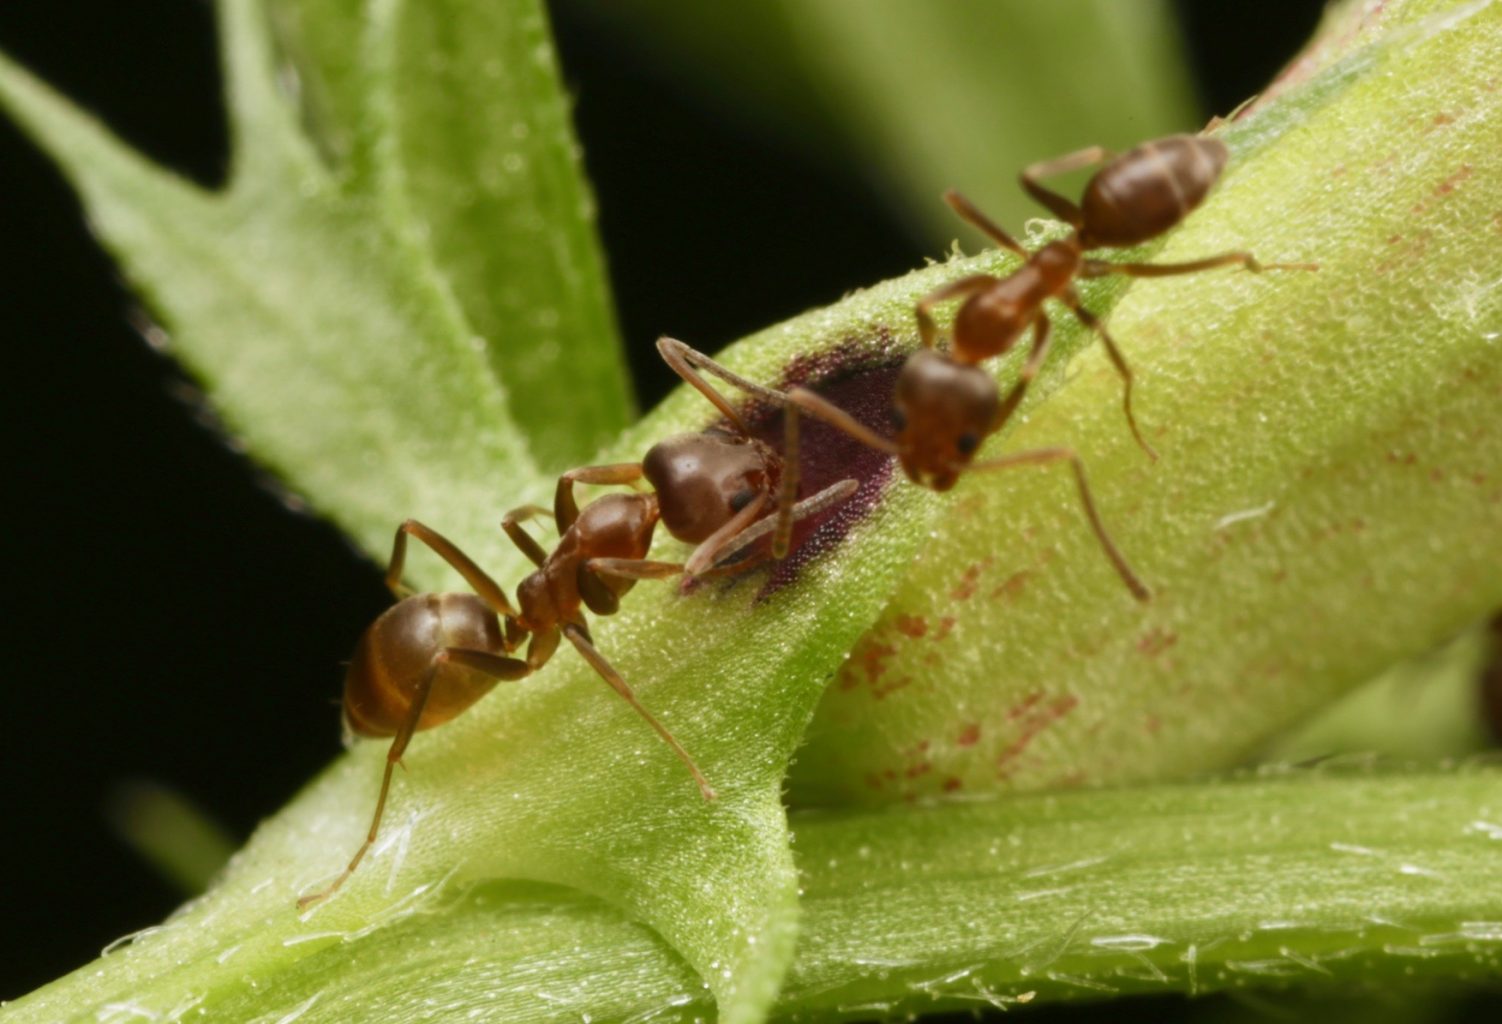 Argentine ants spotted during the City Nature Challenge 2019